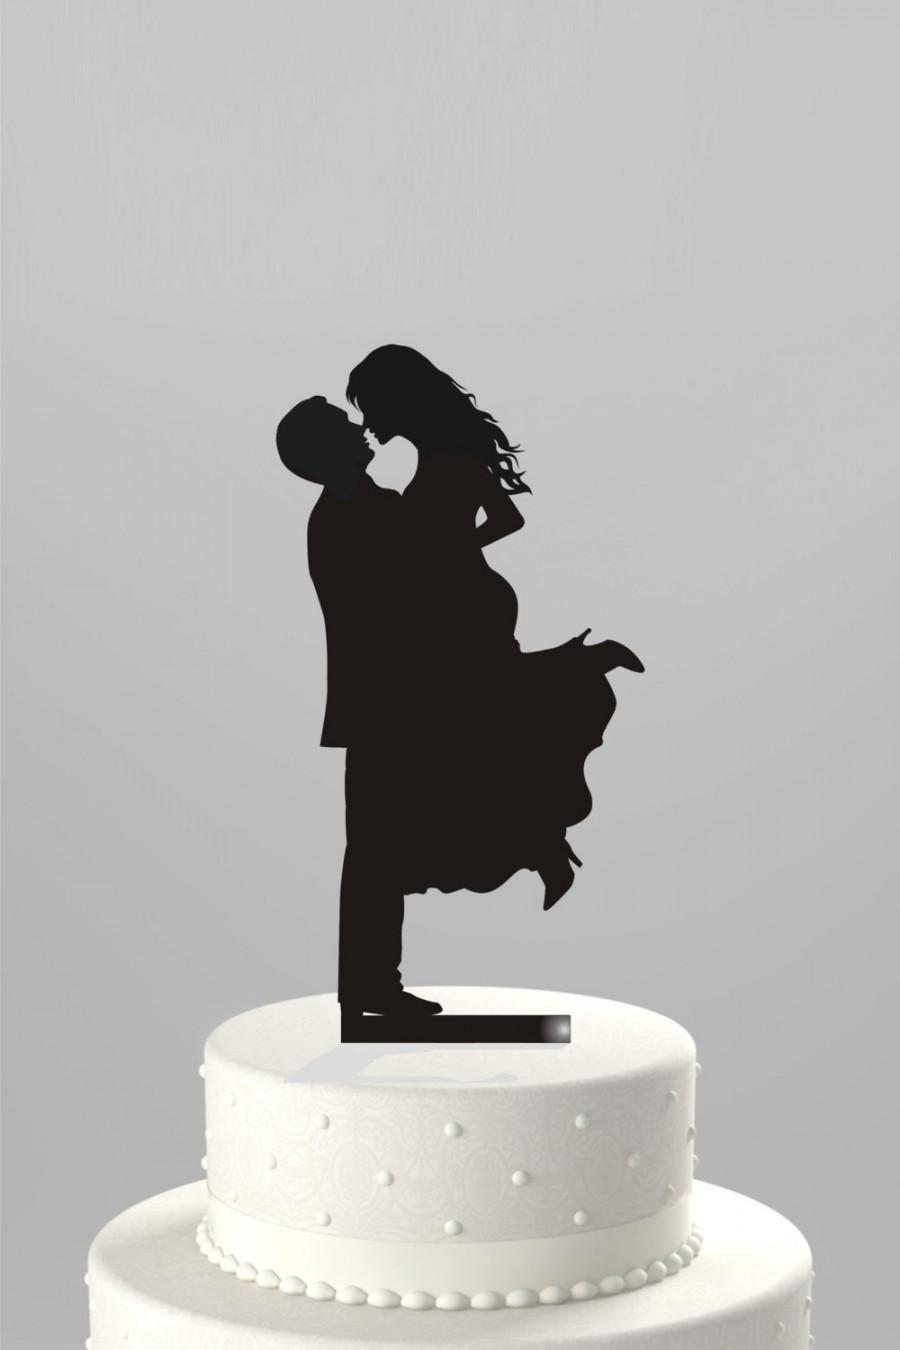 Hochzeit - SALE Price!! Ships Next Day - Wedding Cake Topper Silhouette Groom Lifting his Bride, BLACK Acrylic Cake Topper [CT17]